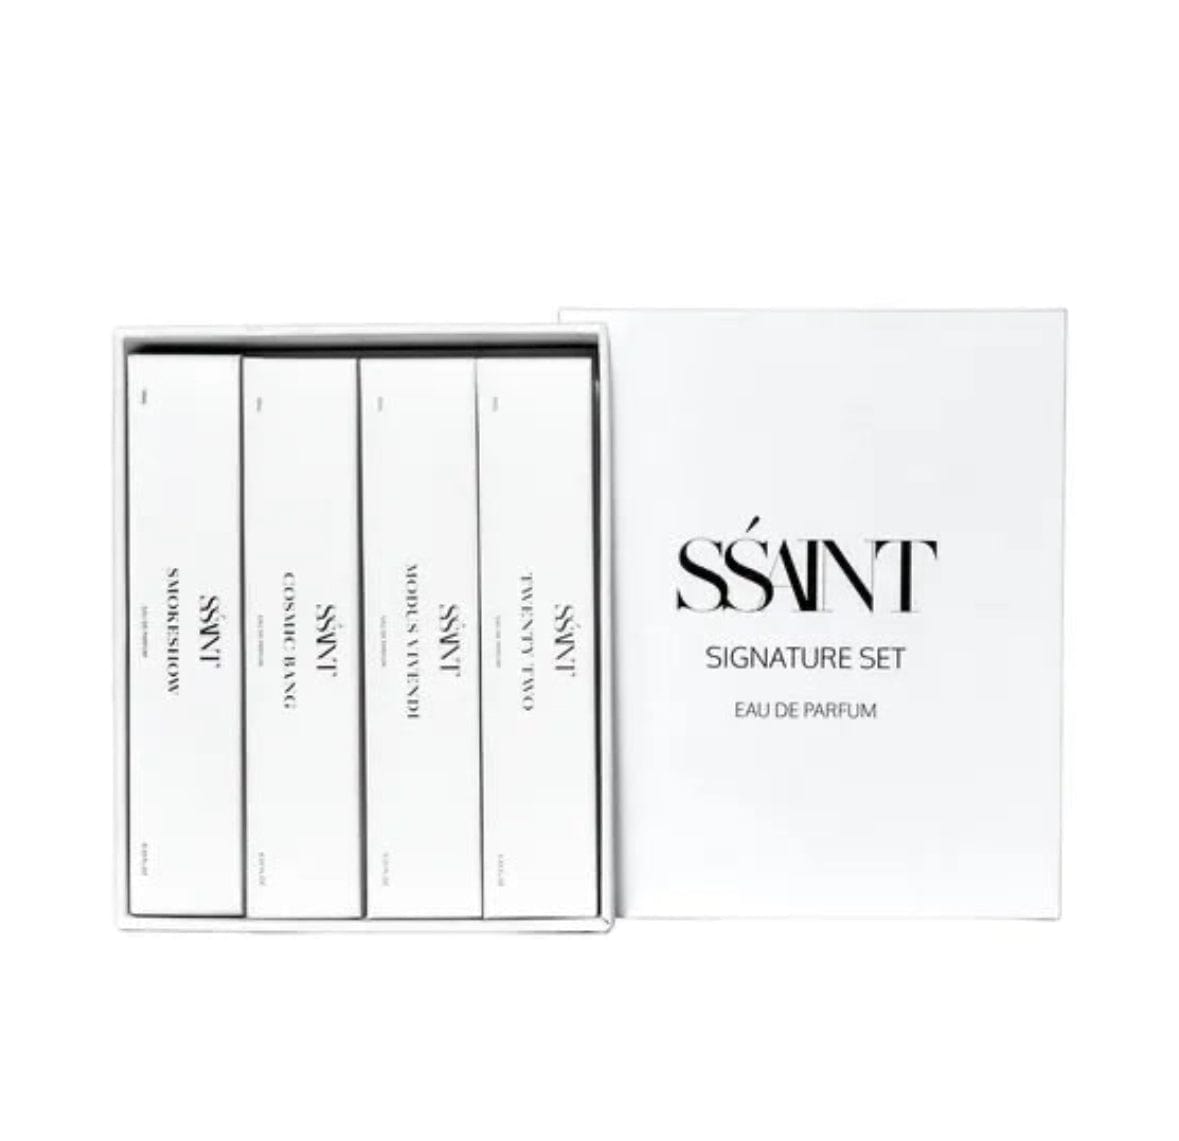 SSAINT Fragrance For Him + Her - Assorted Scents + Sizes SIGNATURE SET by Ssaint